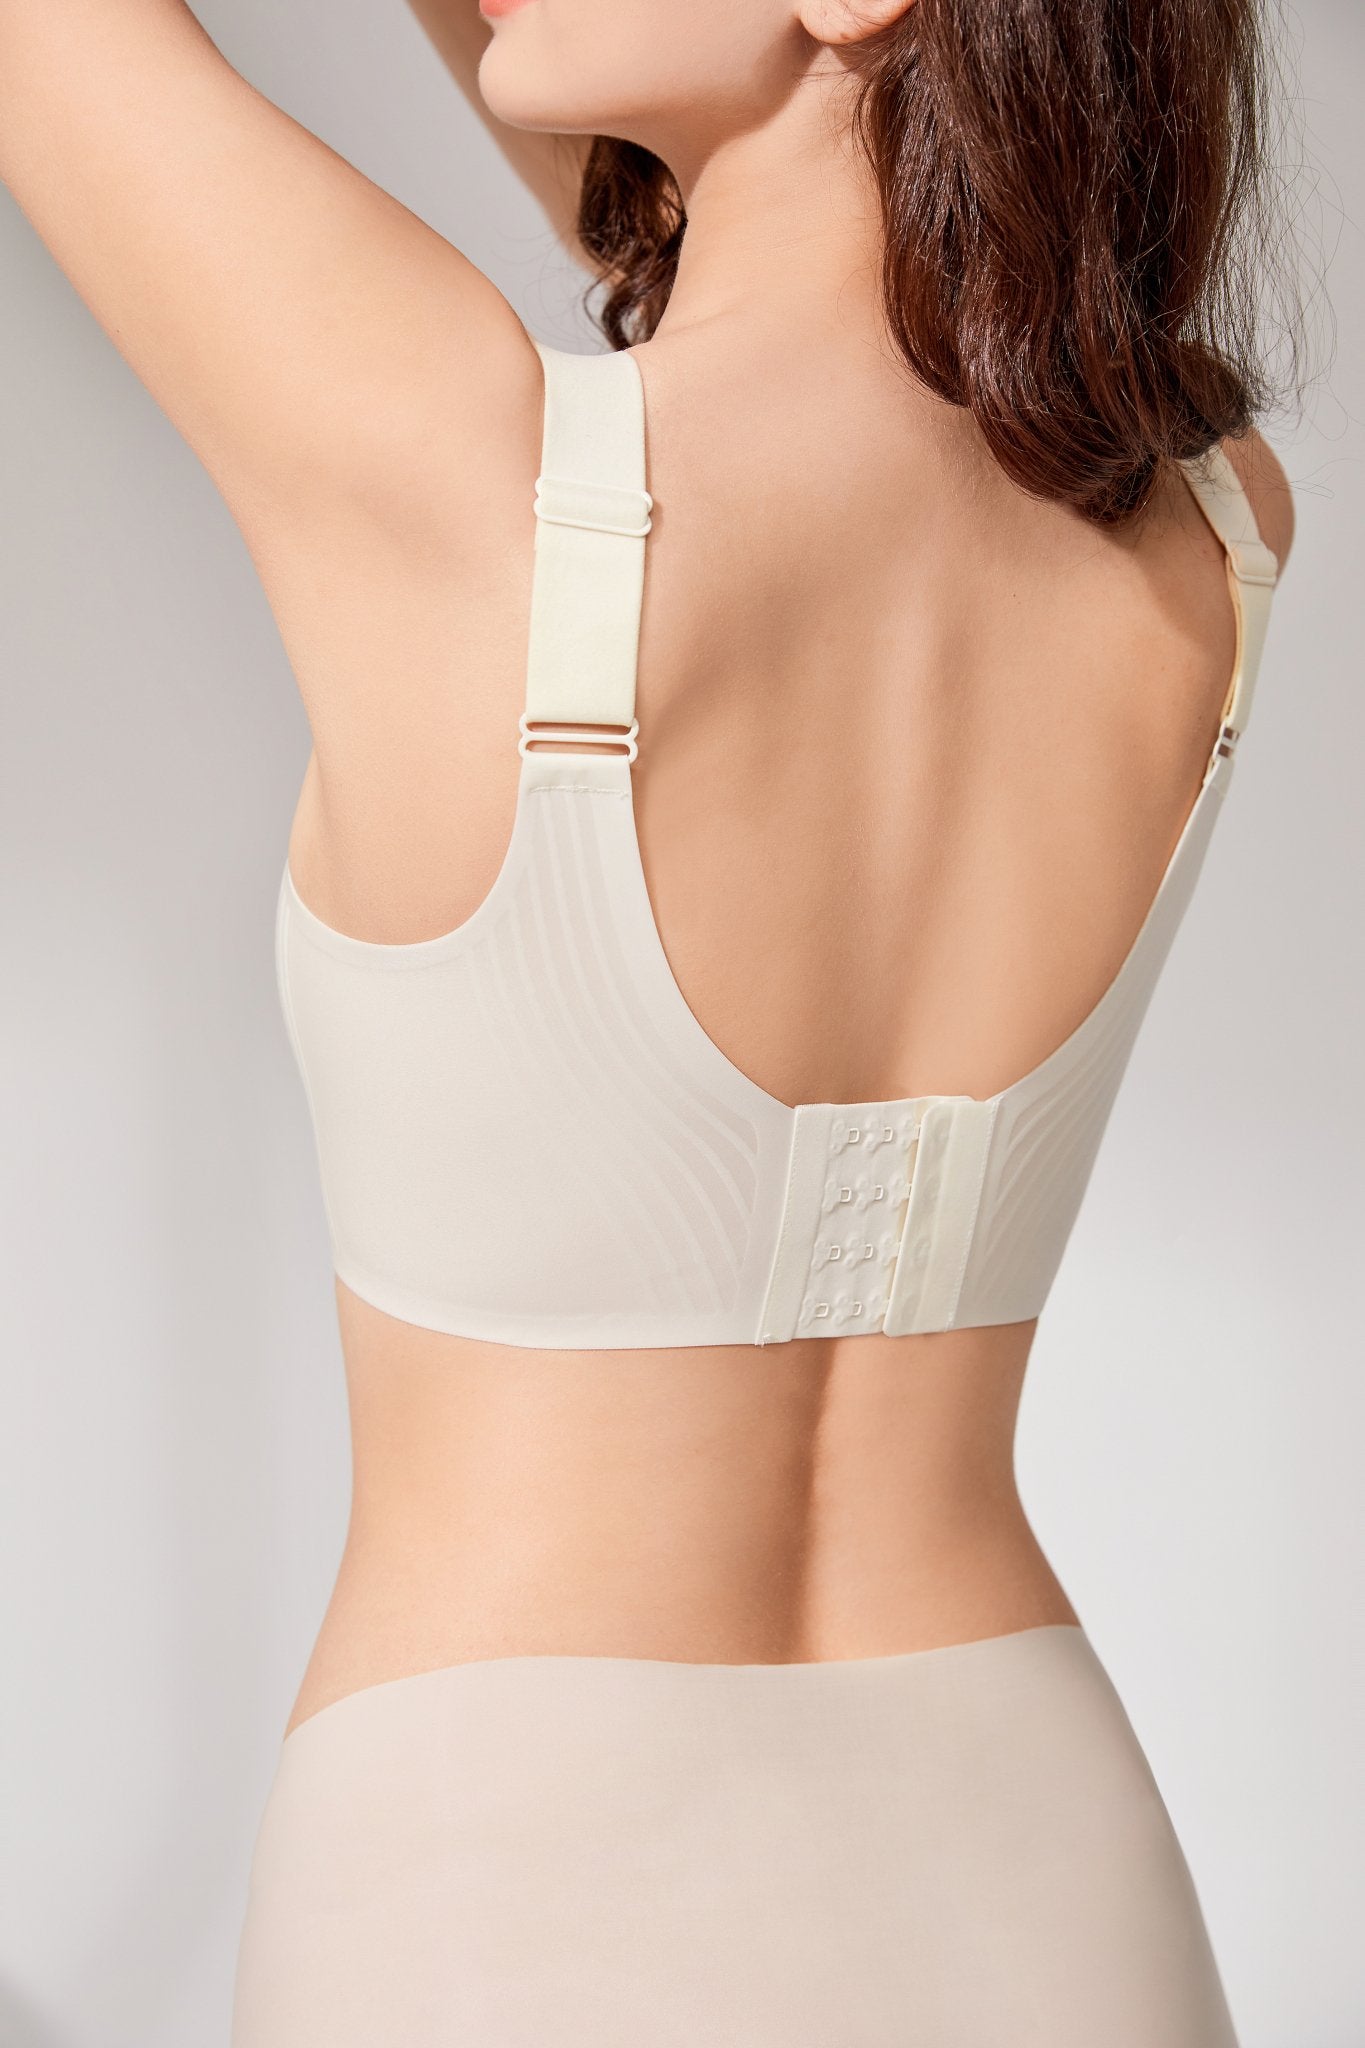 Easy Pieces™️ Summer Ultra-Thin Cool Breathing Minimizer Bra, C-E Cups